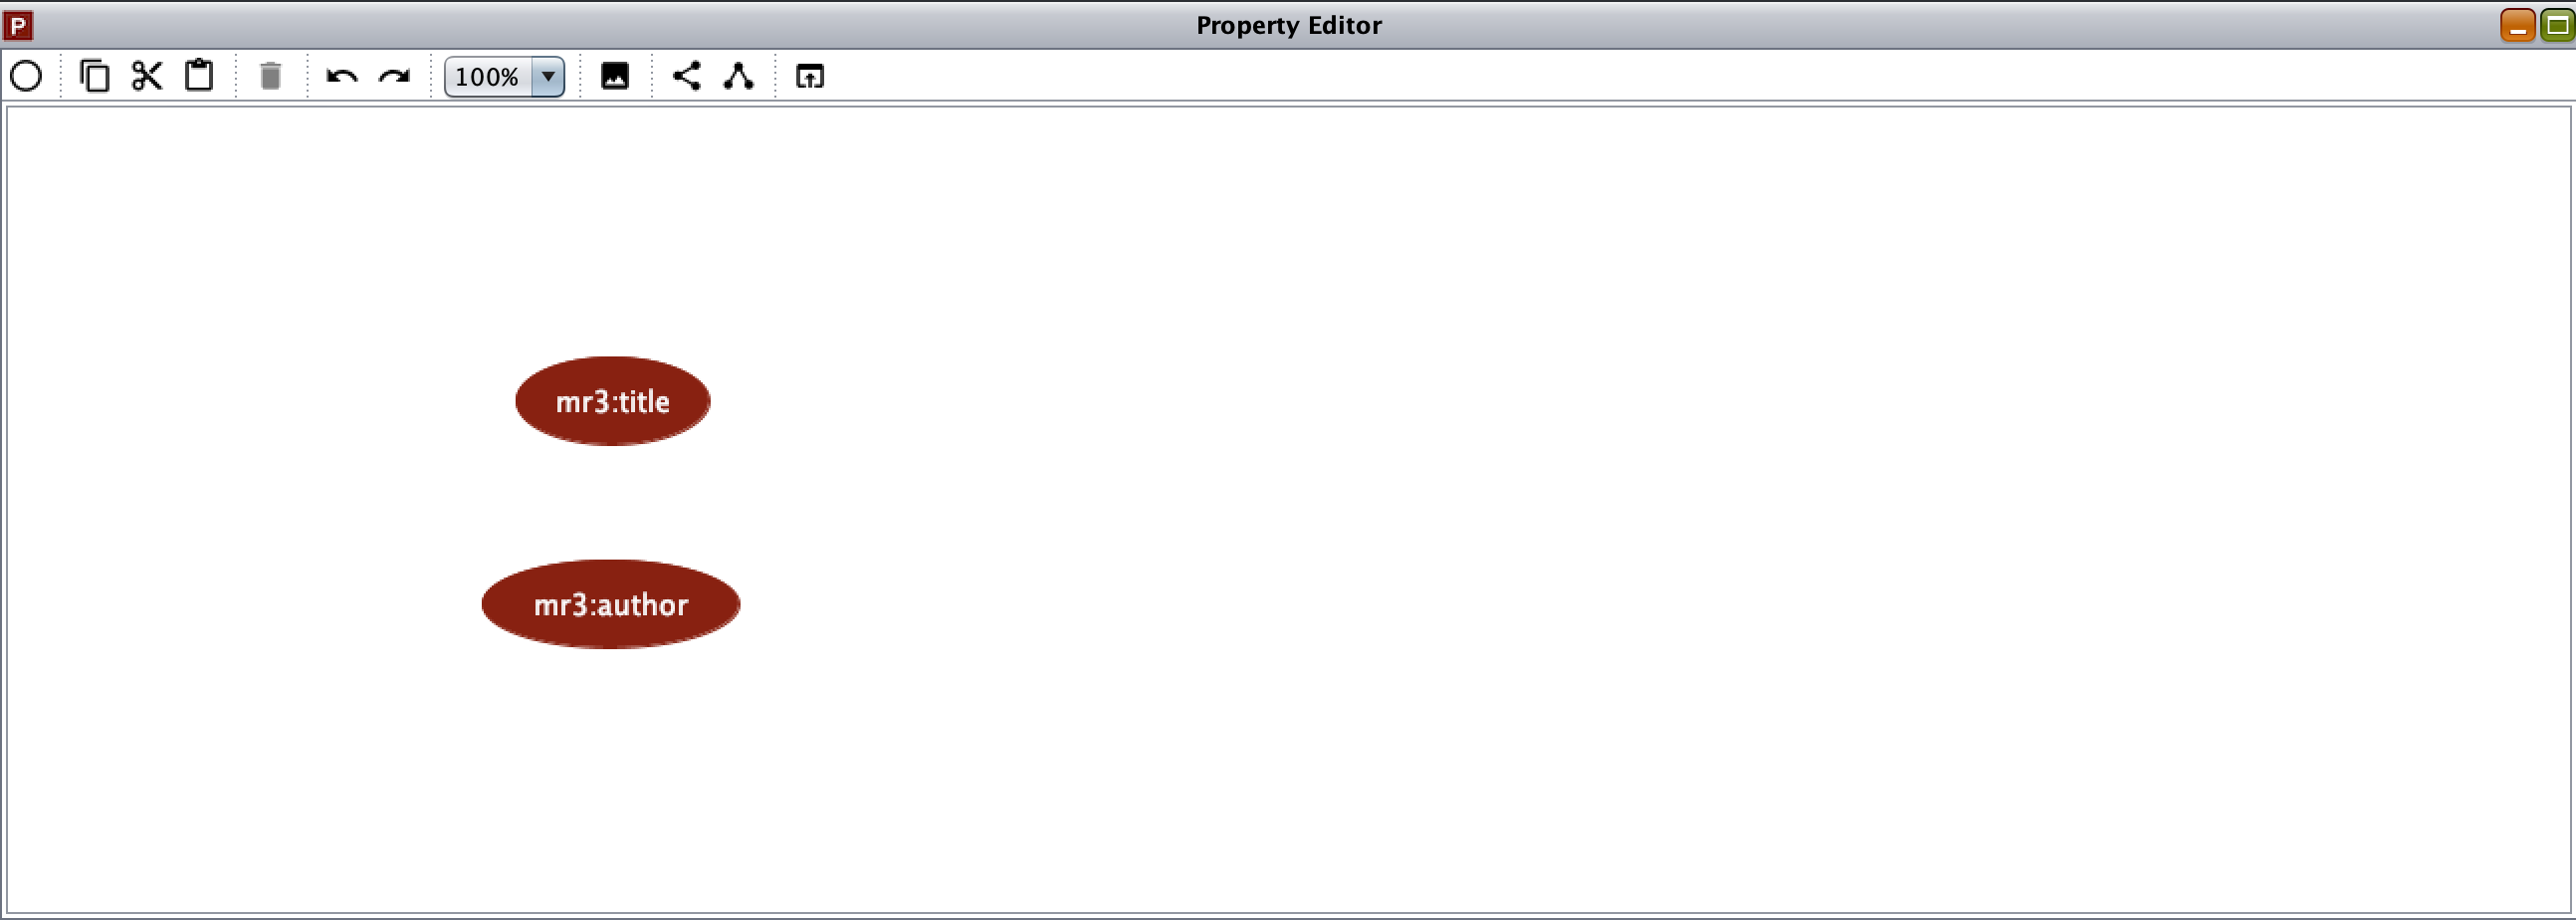 A screenshot of the Property Editor